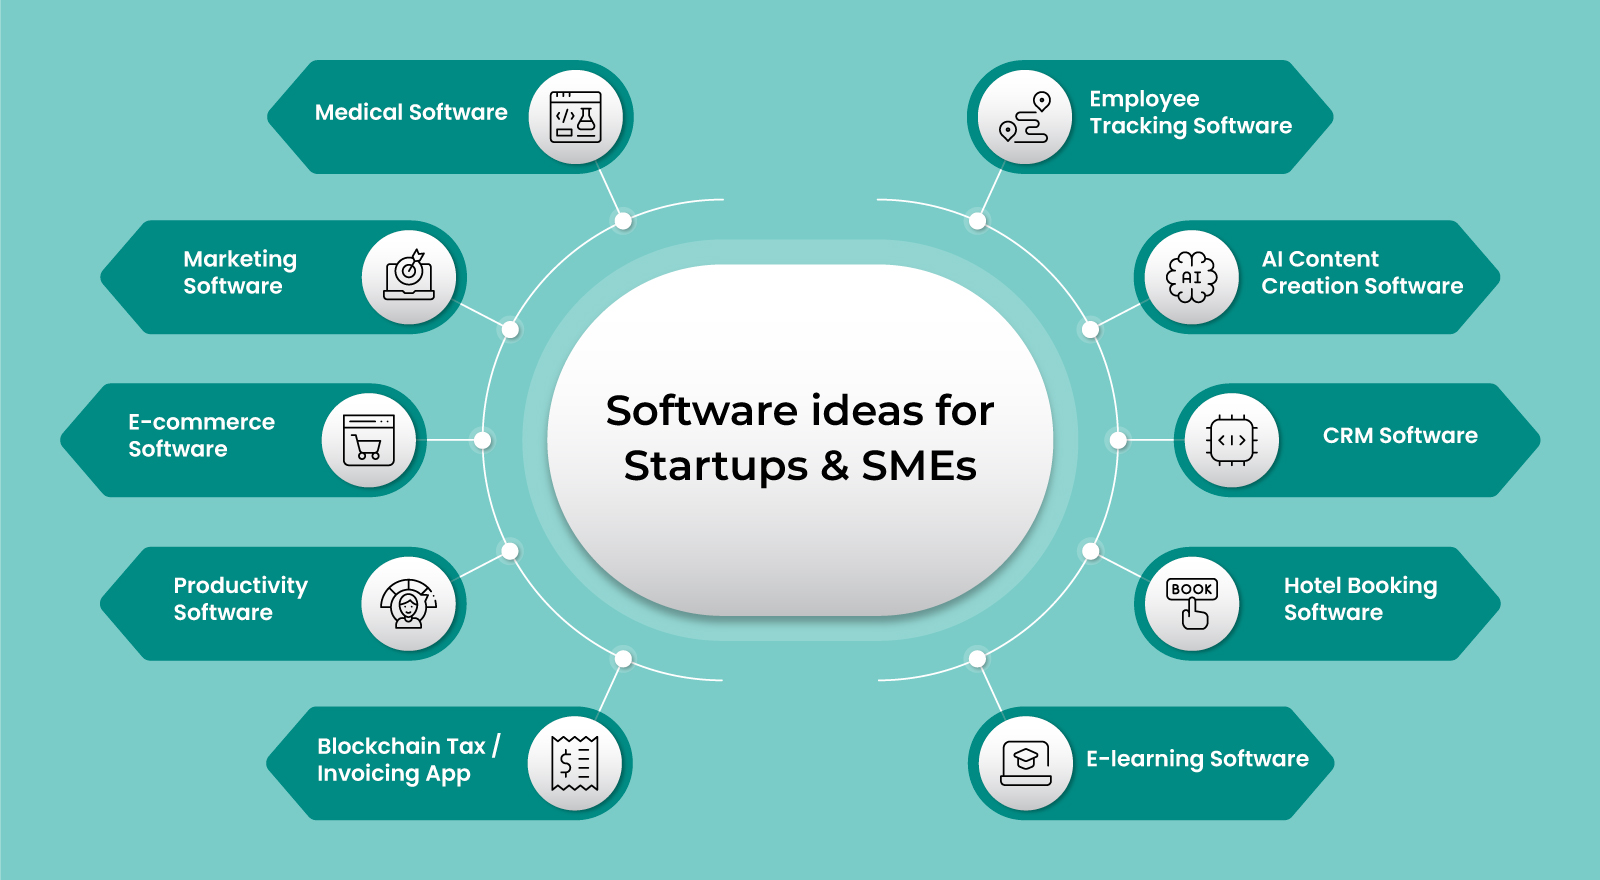 Top 10 software ideas for startups